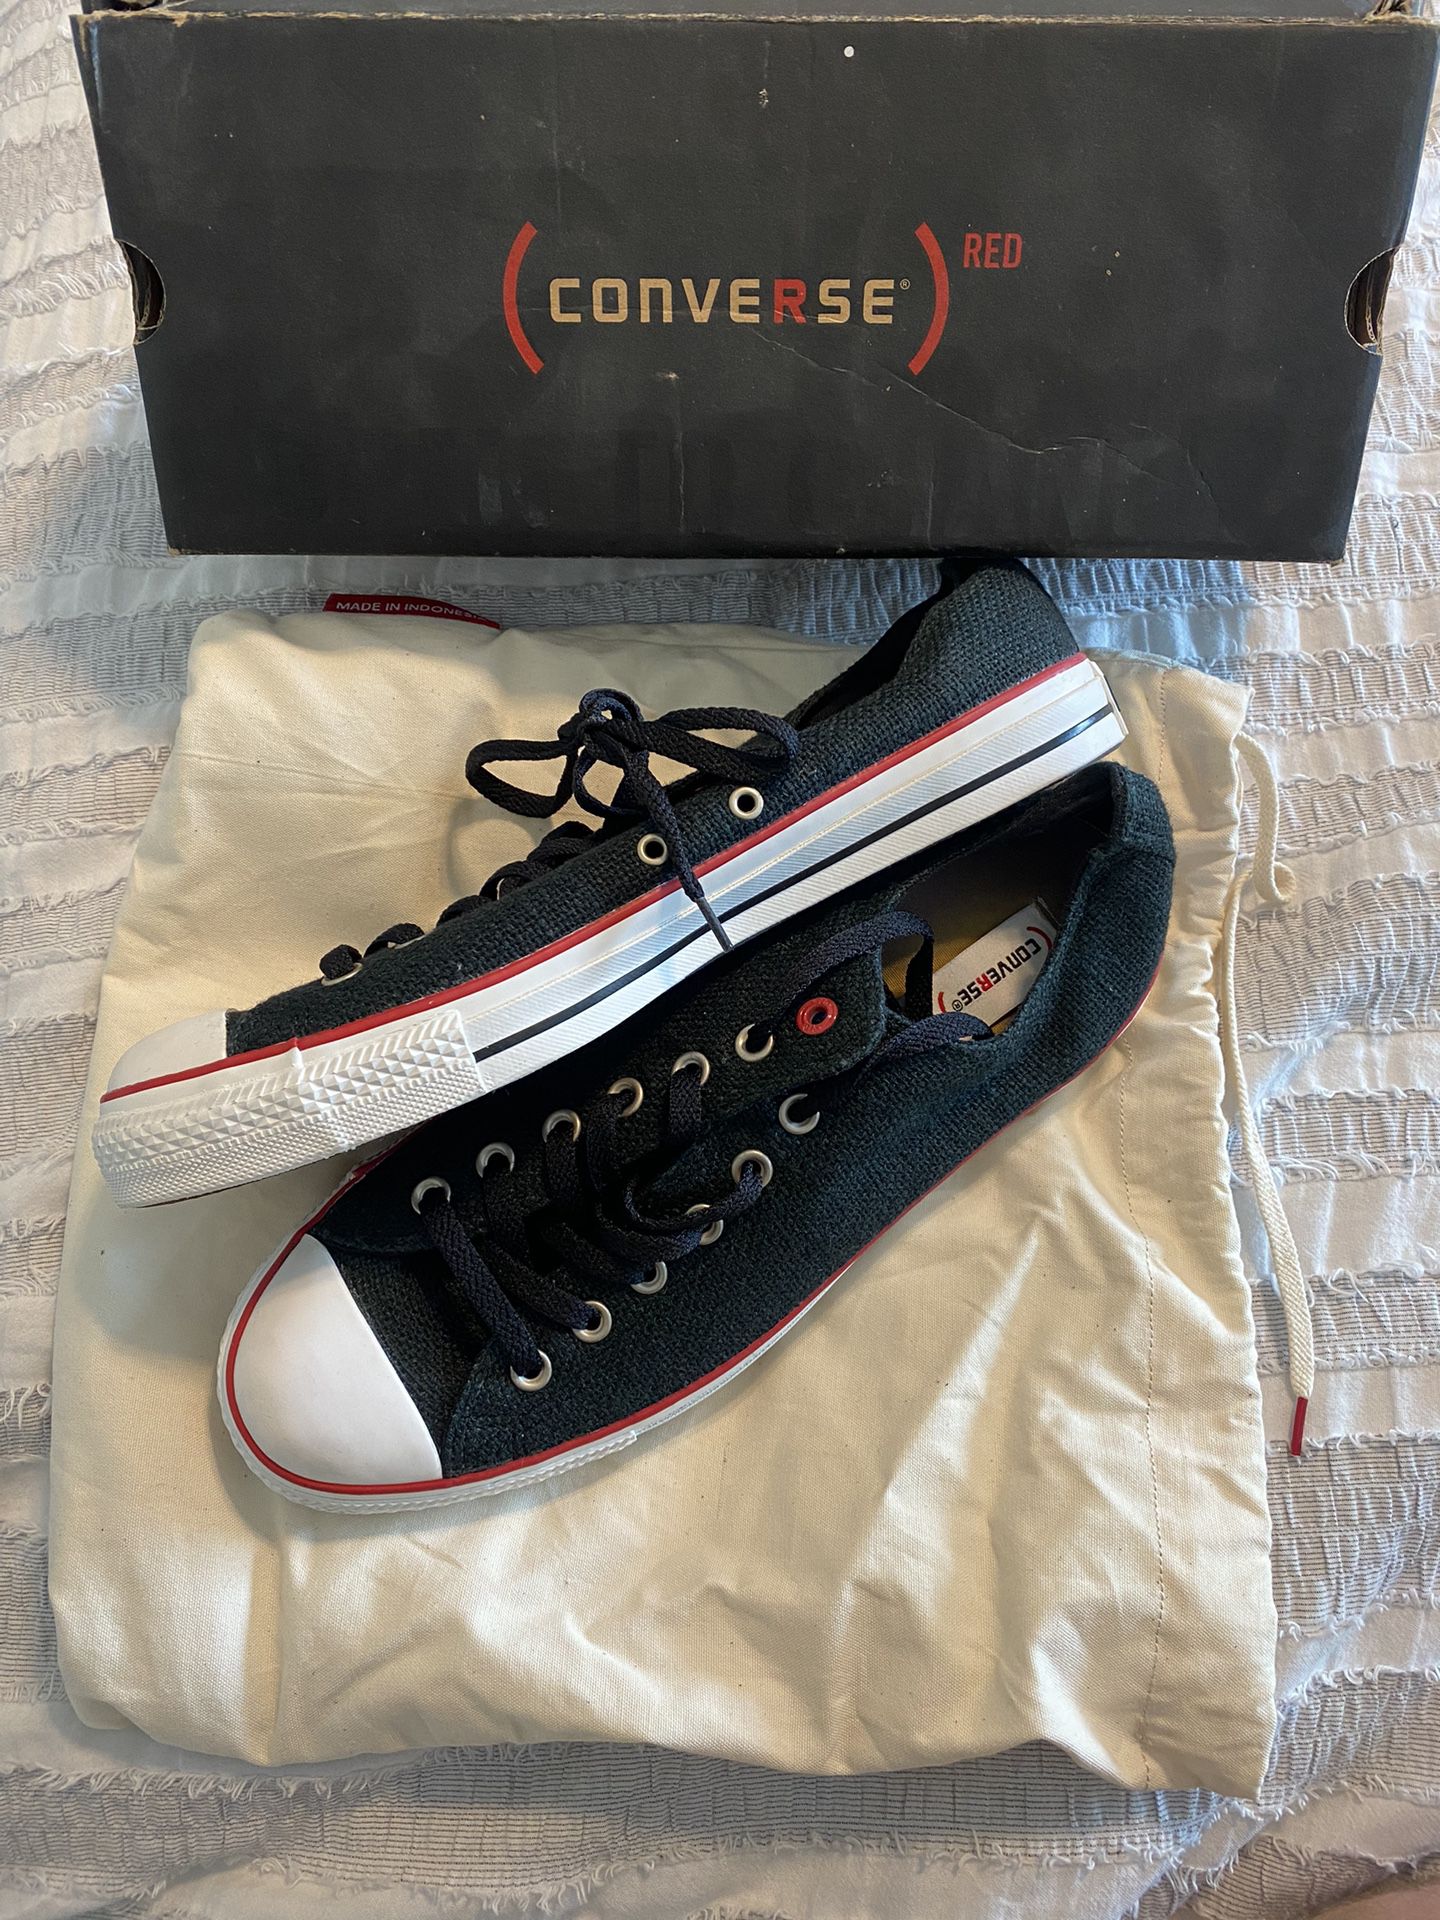 Billie Joe Armstrong Converse Red Rare!!! 2008, MAKE OFFER!!! for Sale in Carrollton, TX - OfferUp